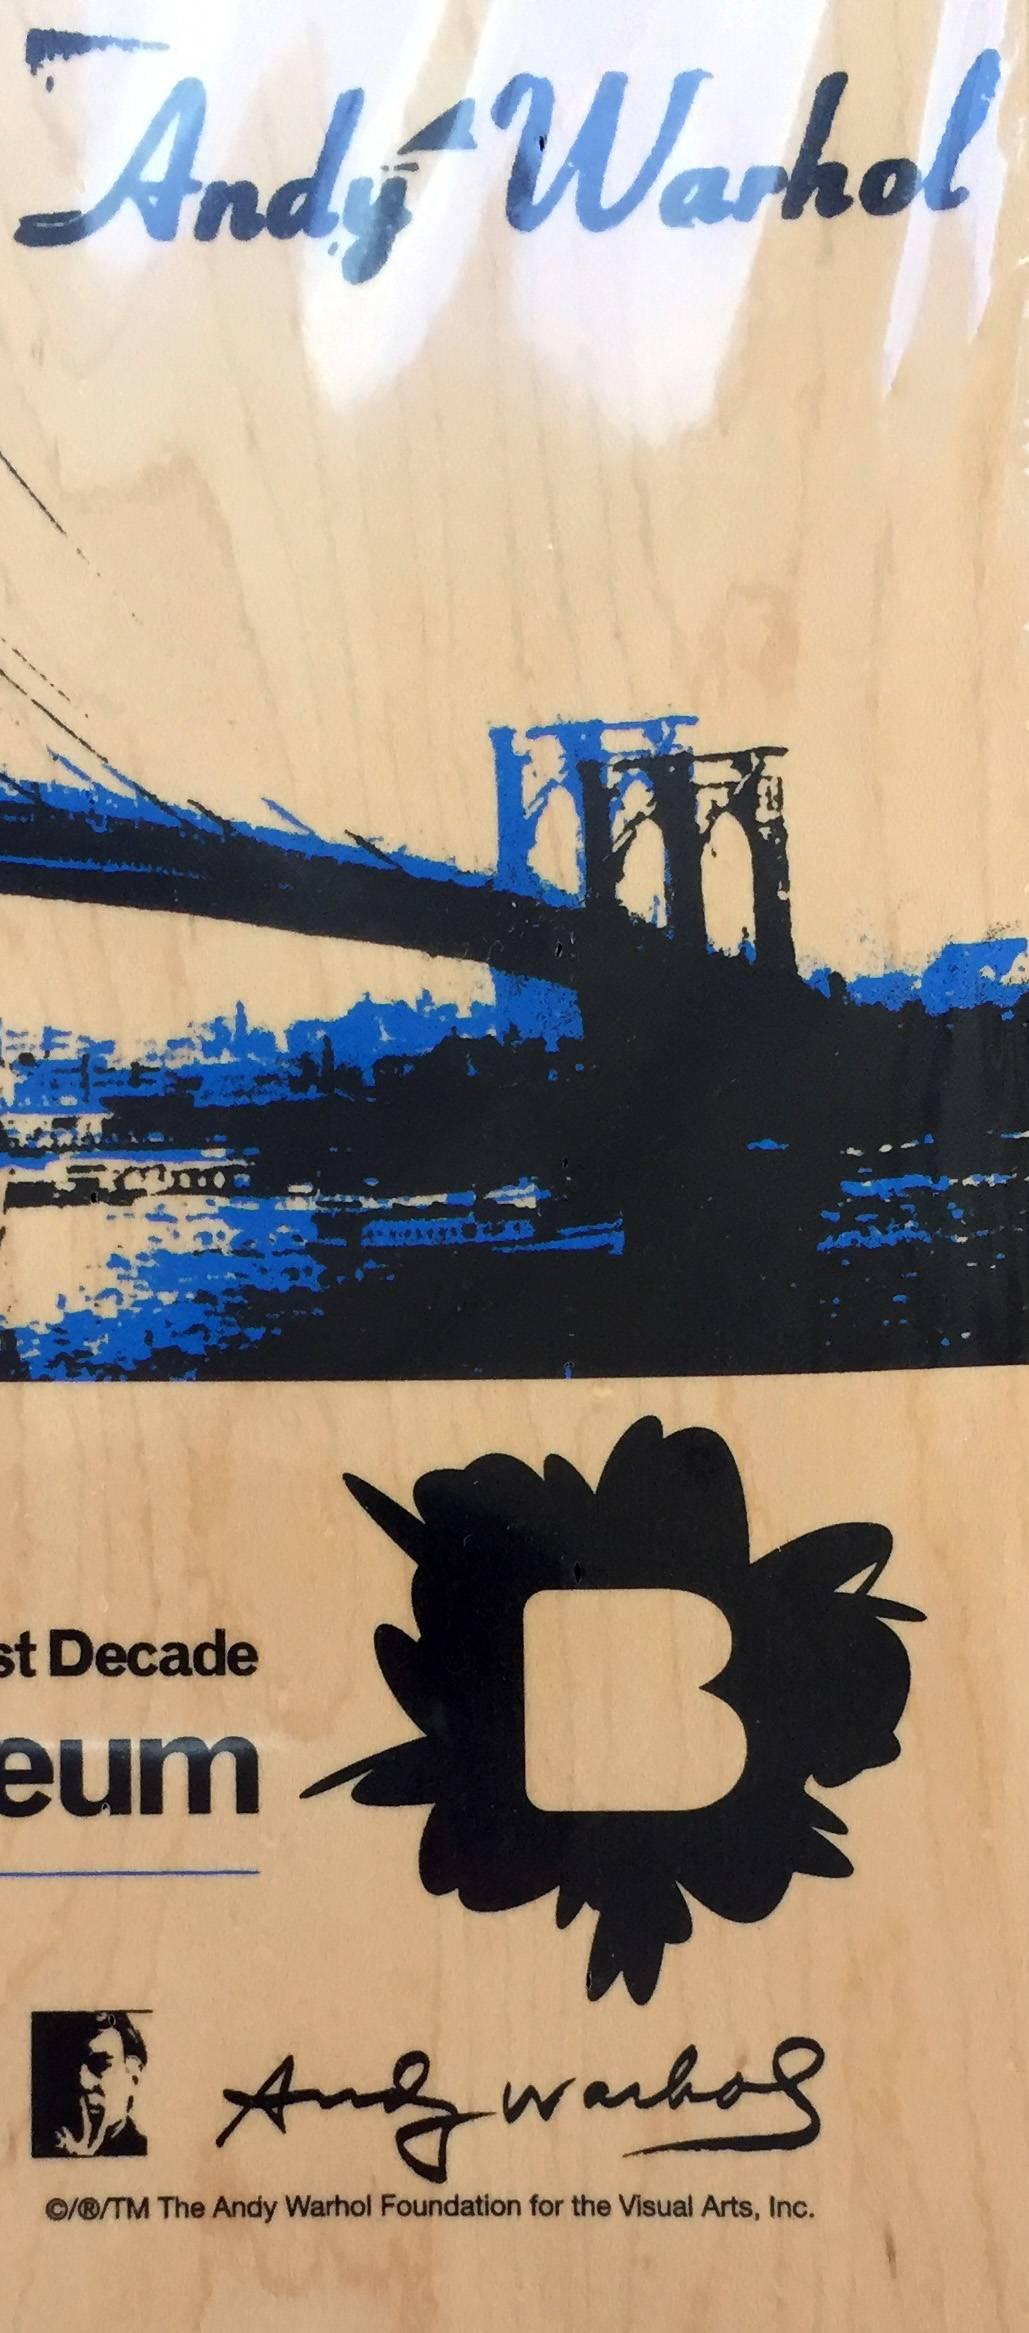 Rare Andy Warhol Brooklyn Bridge Skate Deck New in its original packaging. This limited edition deck was produced in conjunction with the 2010 Brooklyn Museum exhibit: Andy Warhol: The Last Decade. A 2010 collaboration between the Brooklyn Museum, 